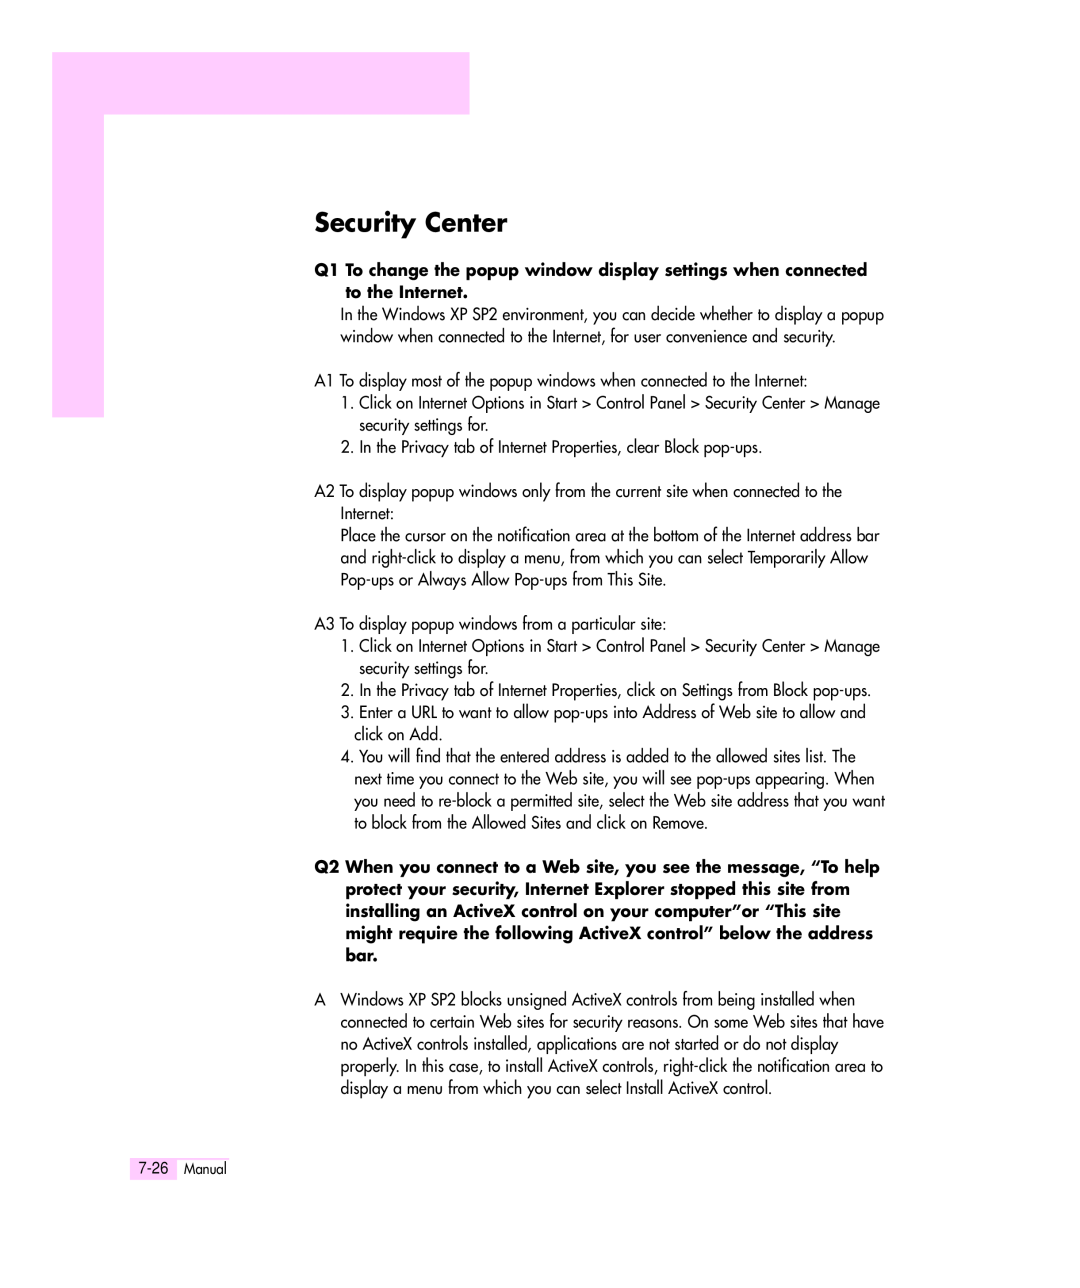 Samsung Q35 manual Security Center, Q2 When you connect to a Web site, you see the message, “To help 